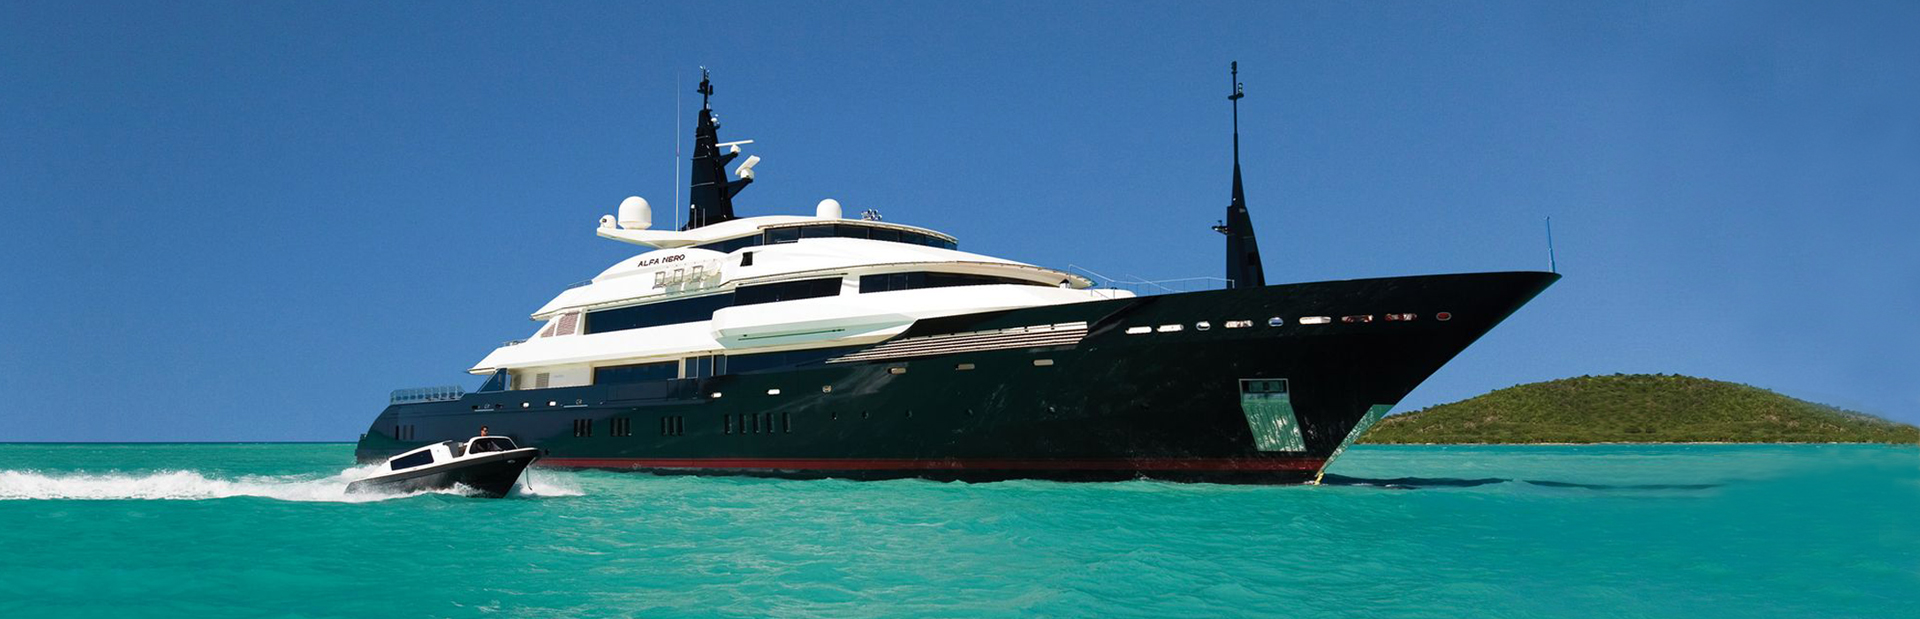 luxury motor yachts for hire